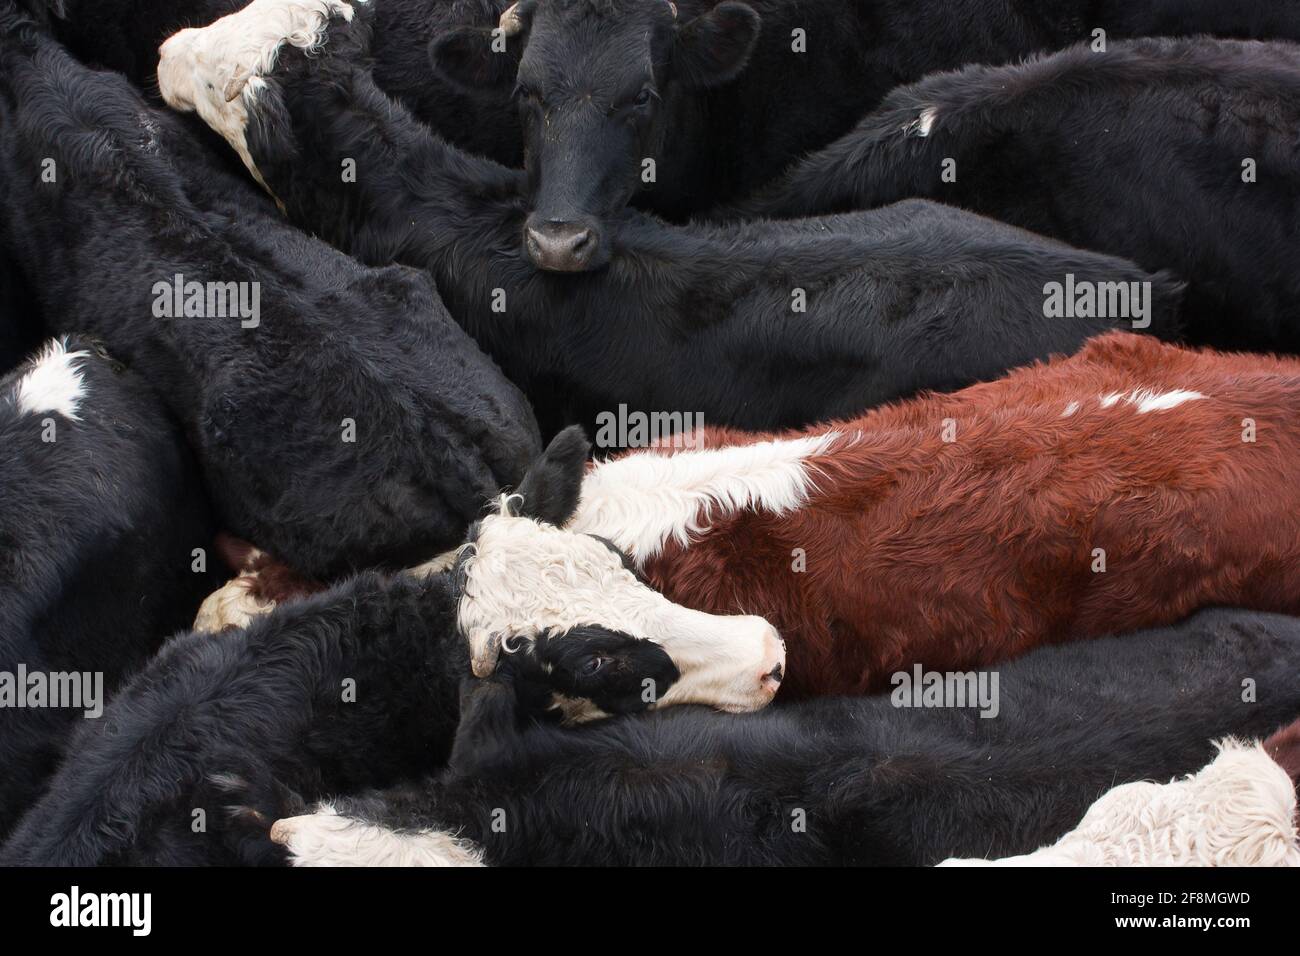 Herd of cattle from above Stock Photo